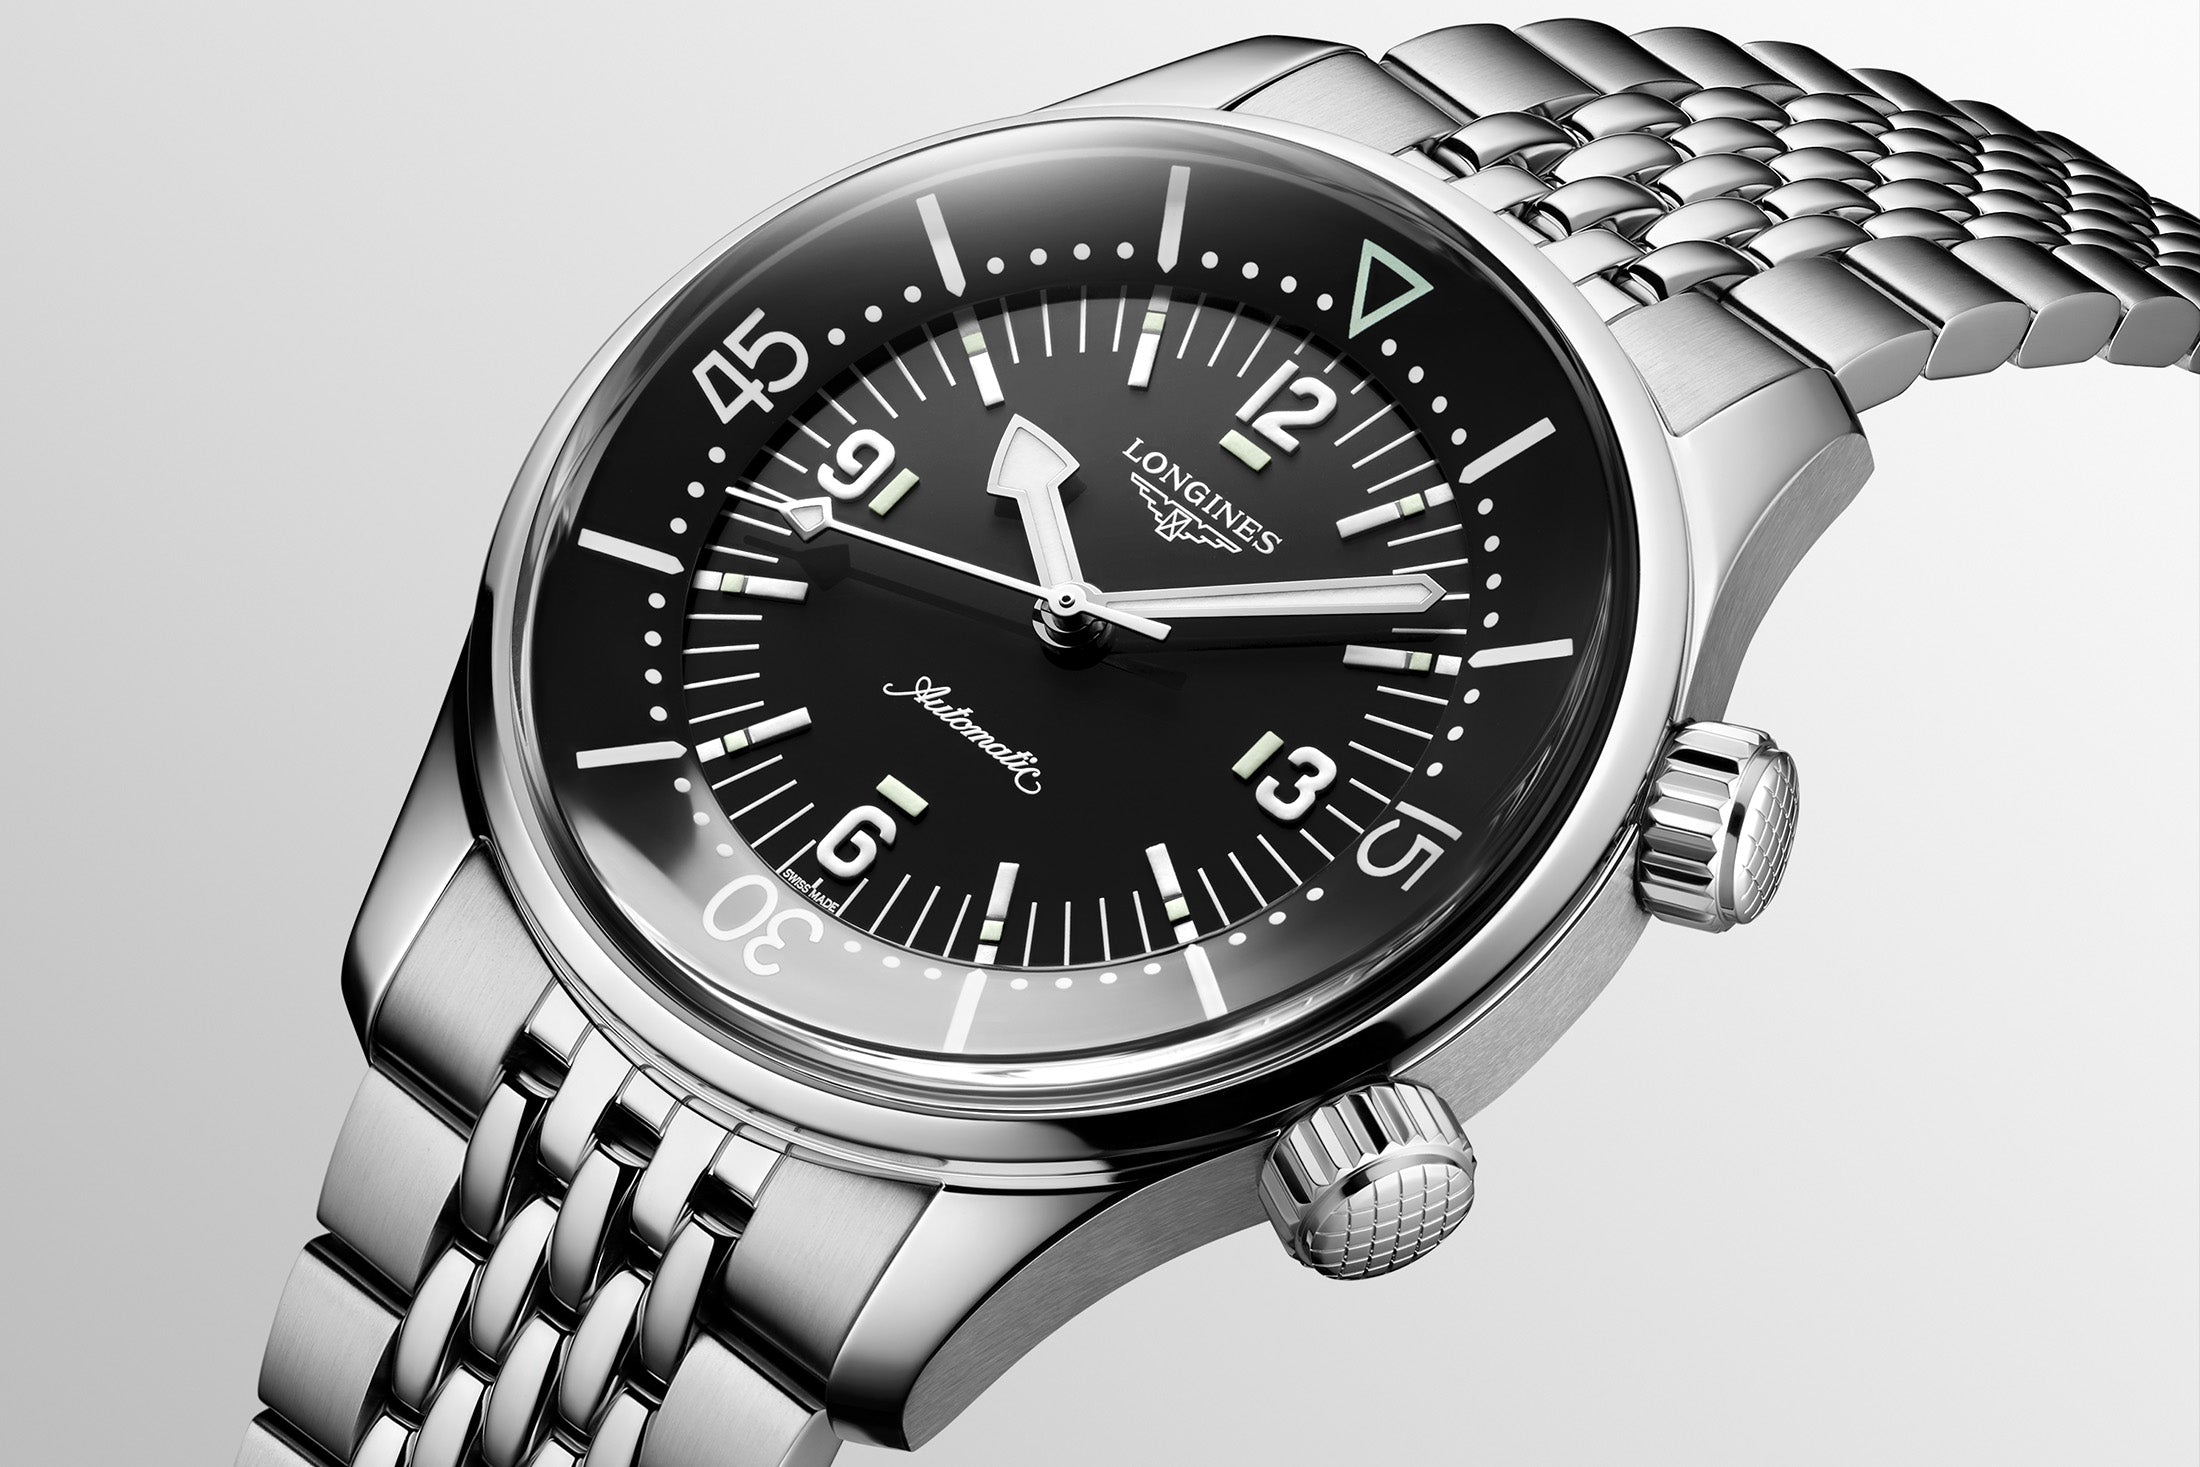 The Longines Legend Diver now comes in 39mm